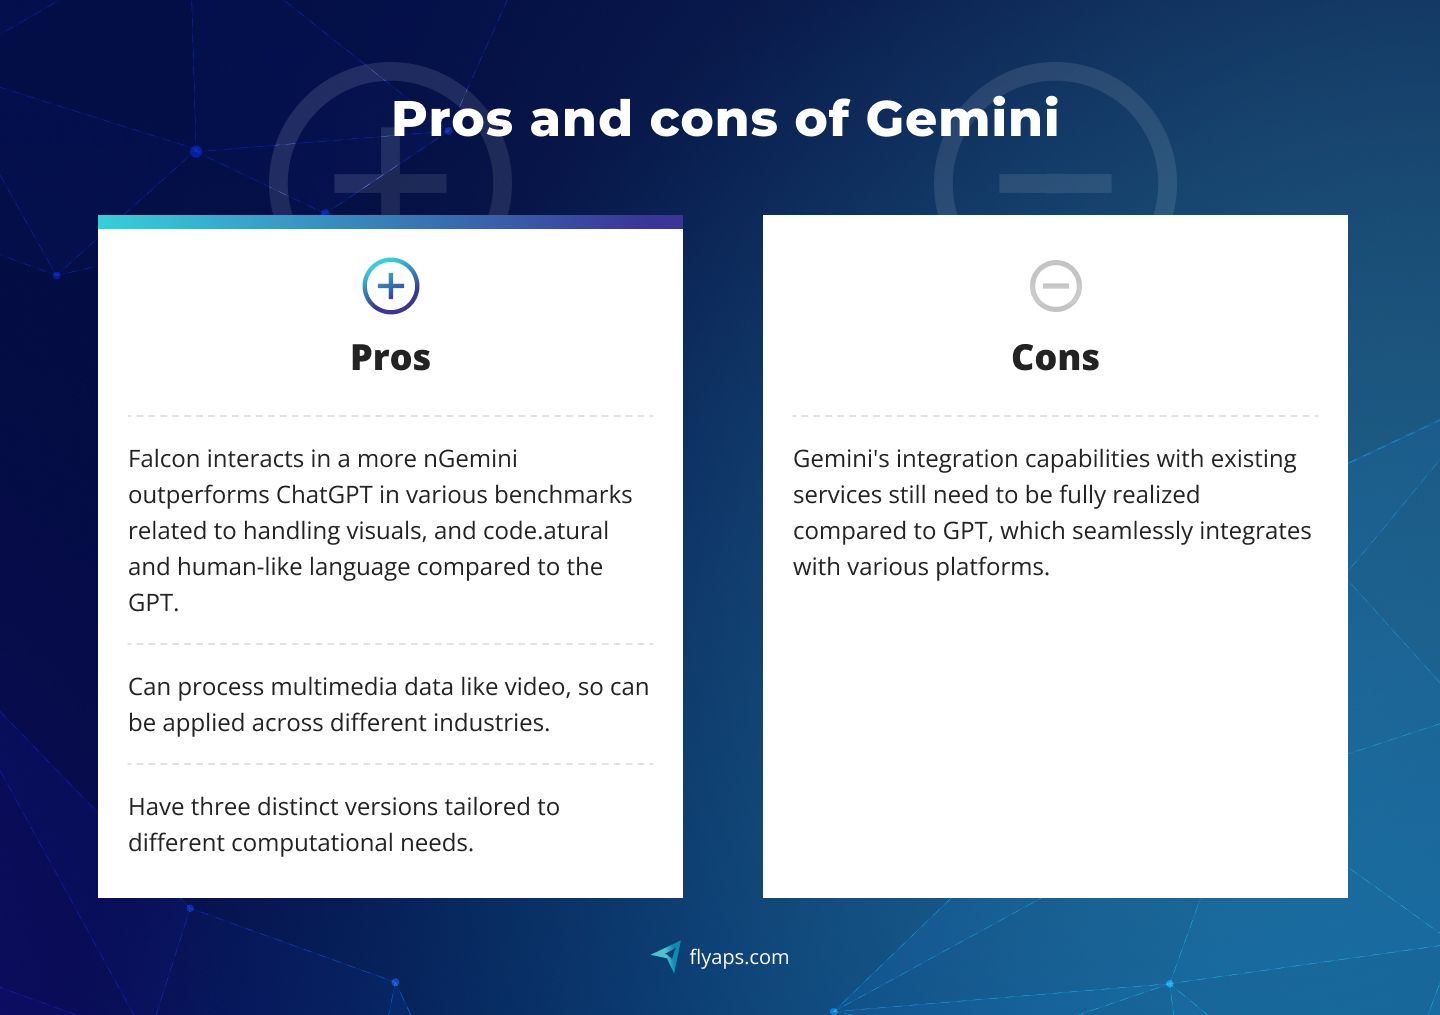 Pros and cons of Gemini